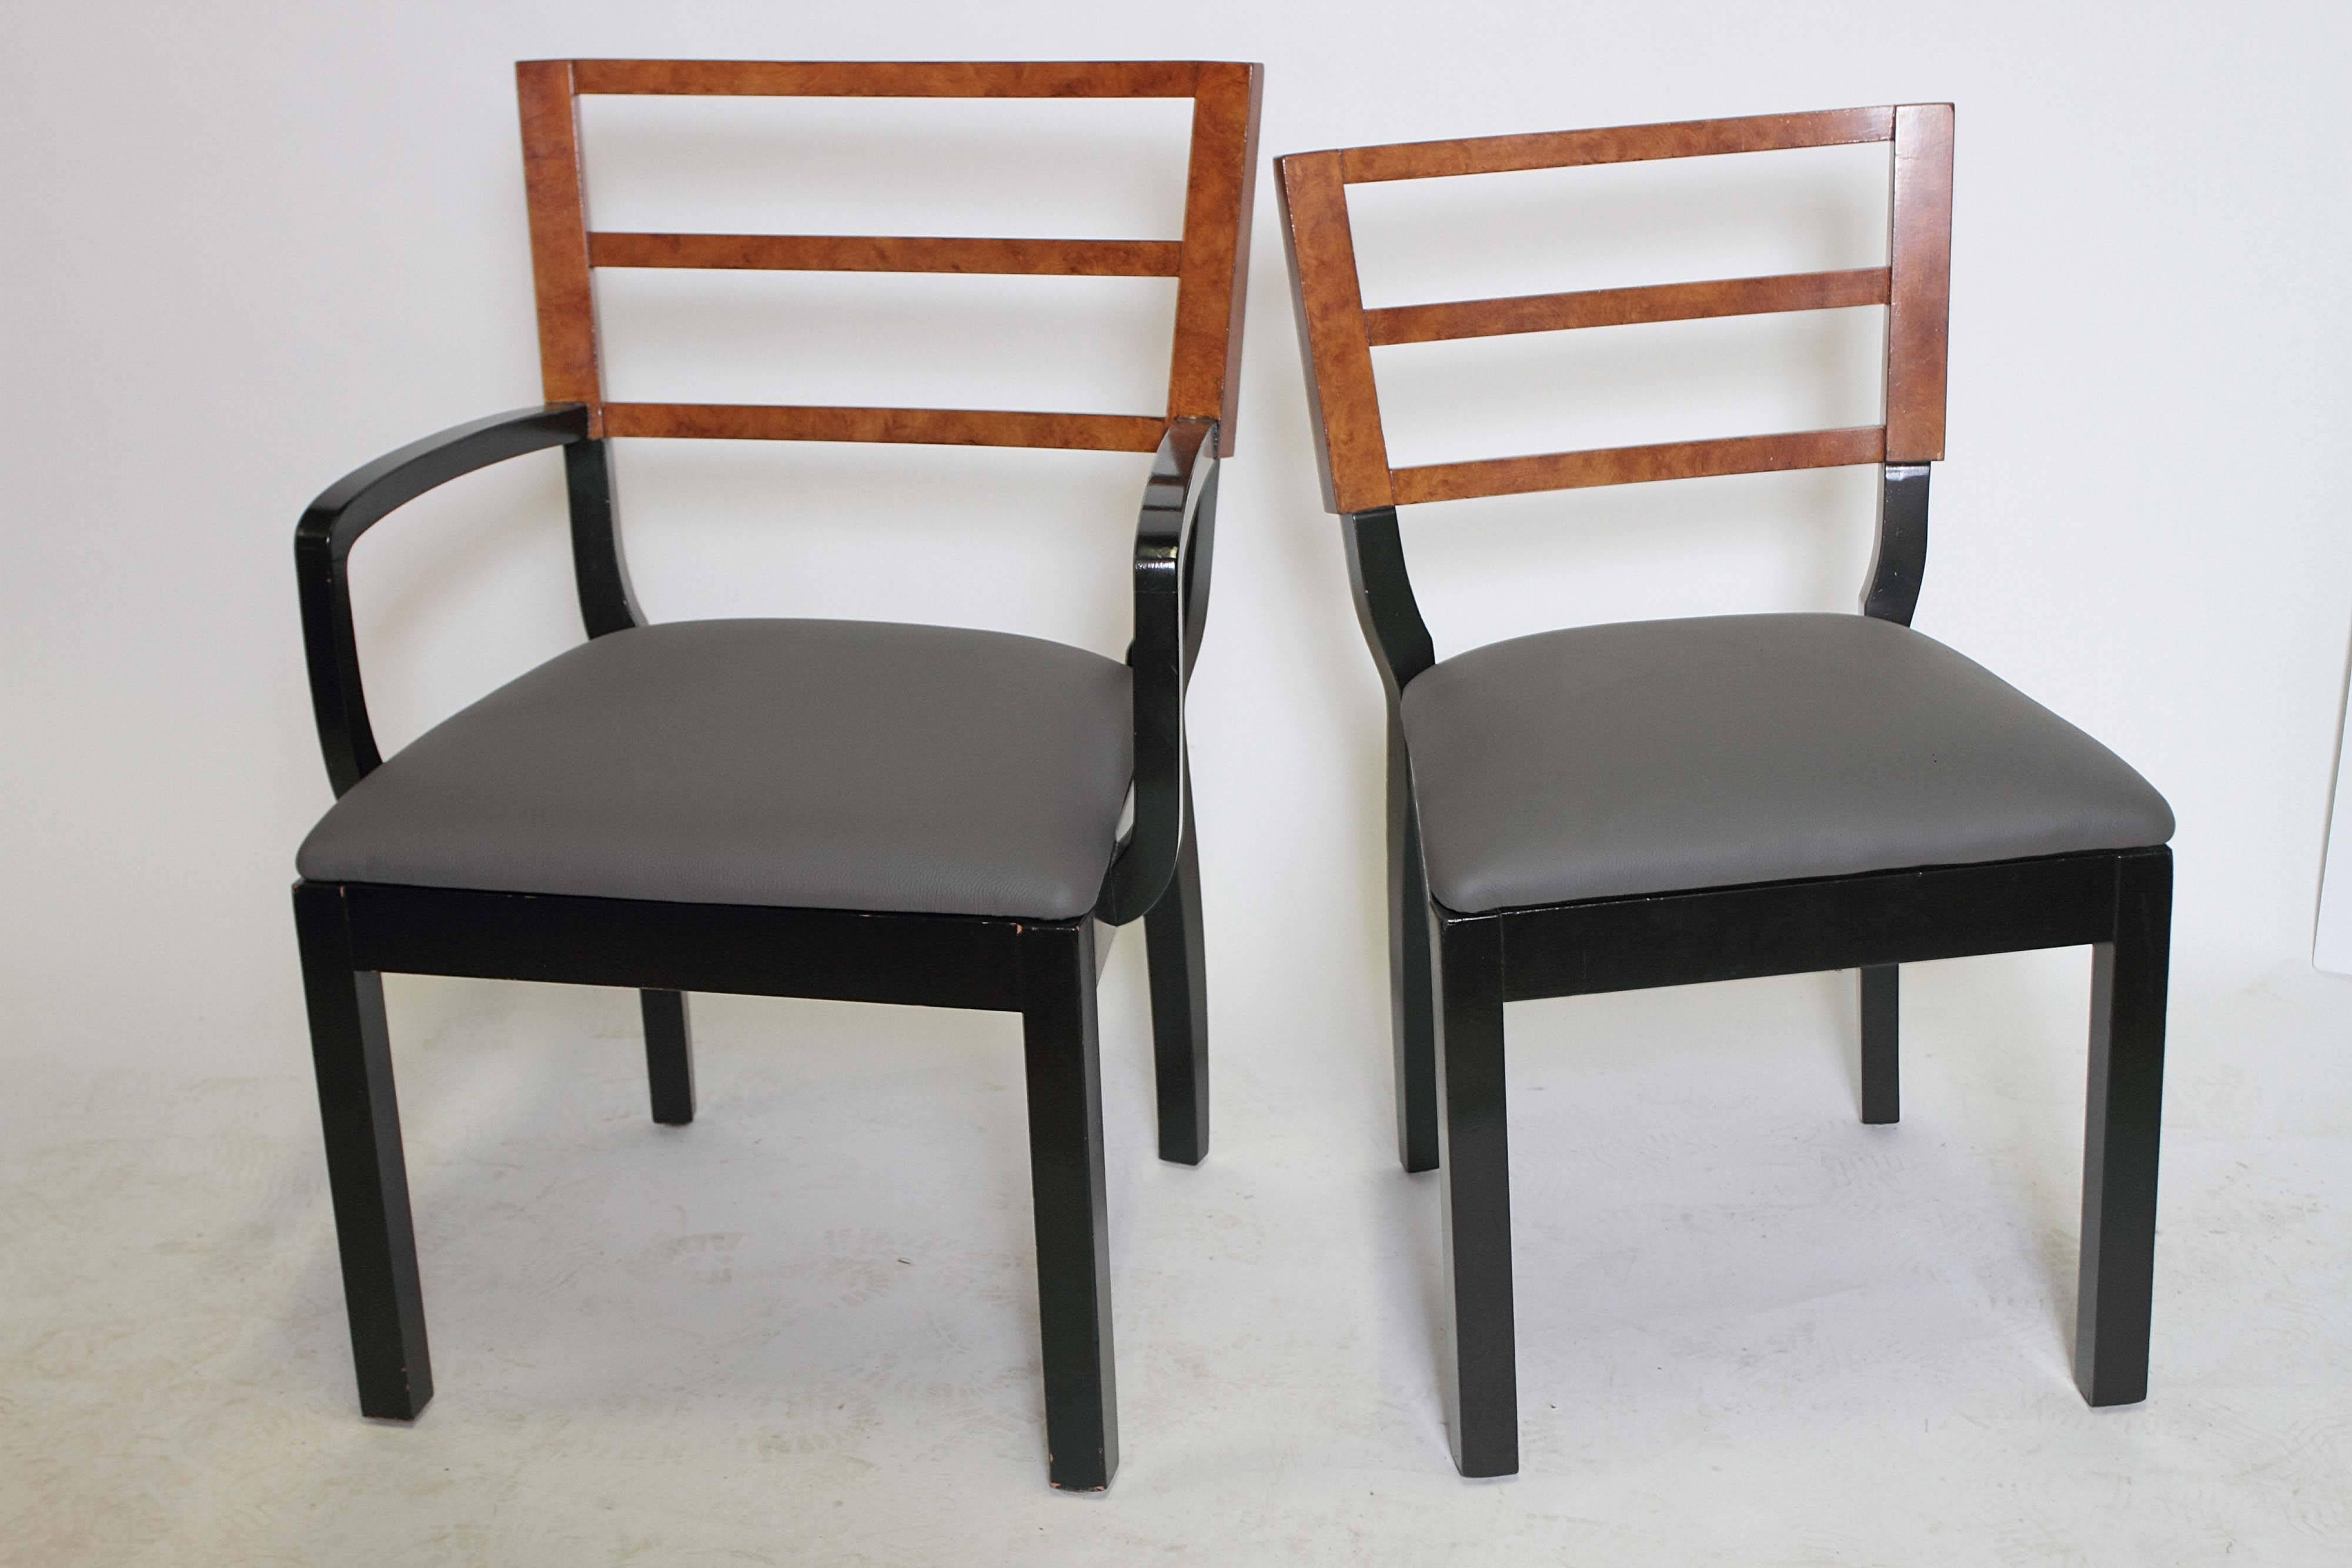 Lacquered Art Deco Hastings Dining Table / Chairs Rare Double X-Base Teague / Deskey For Sale